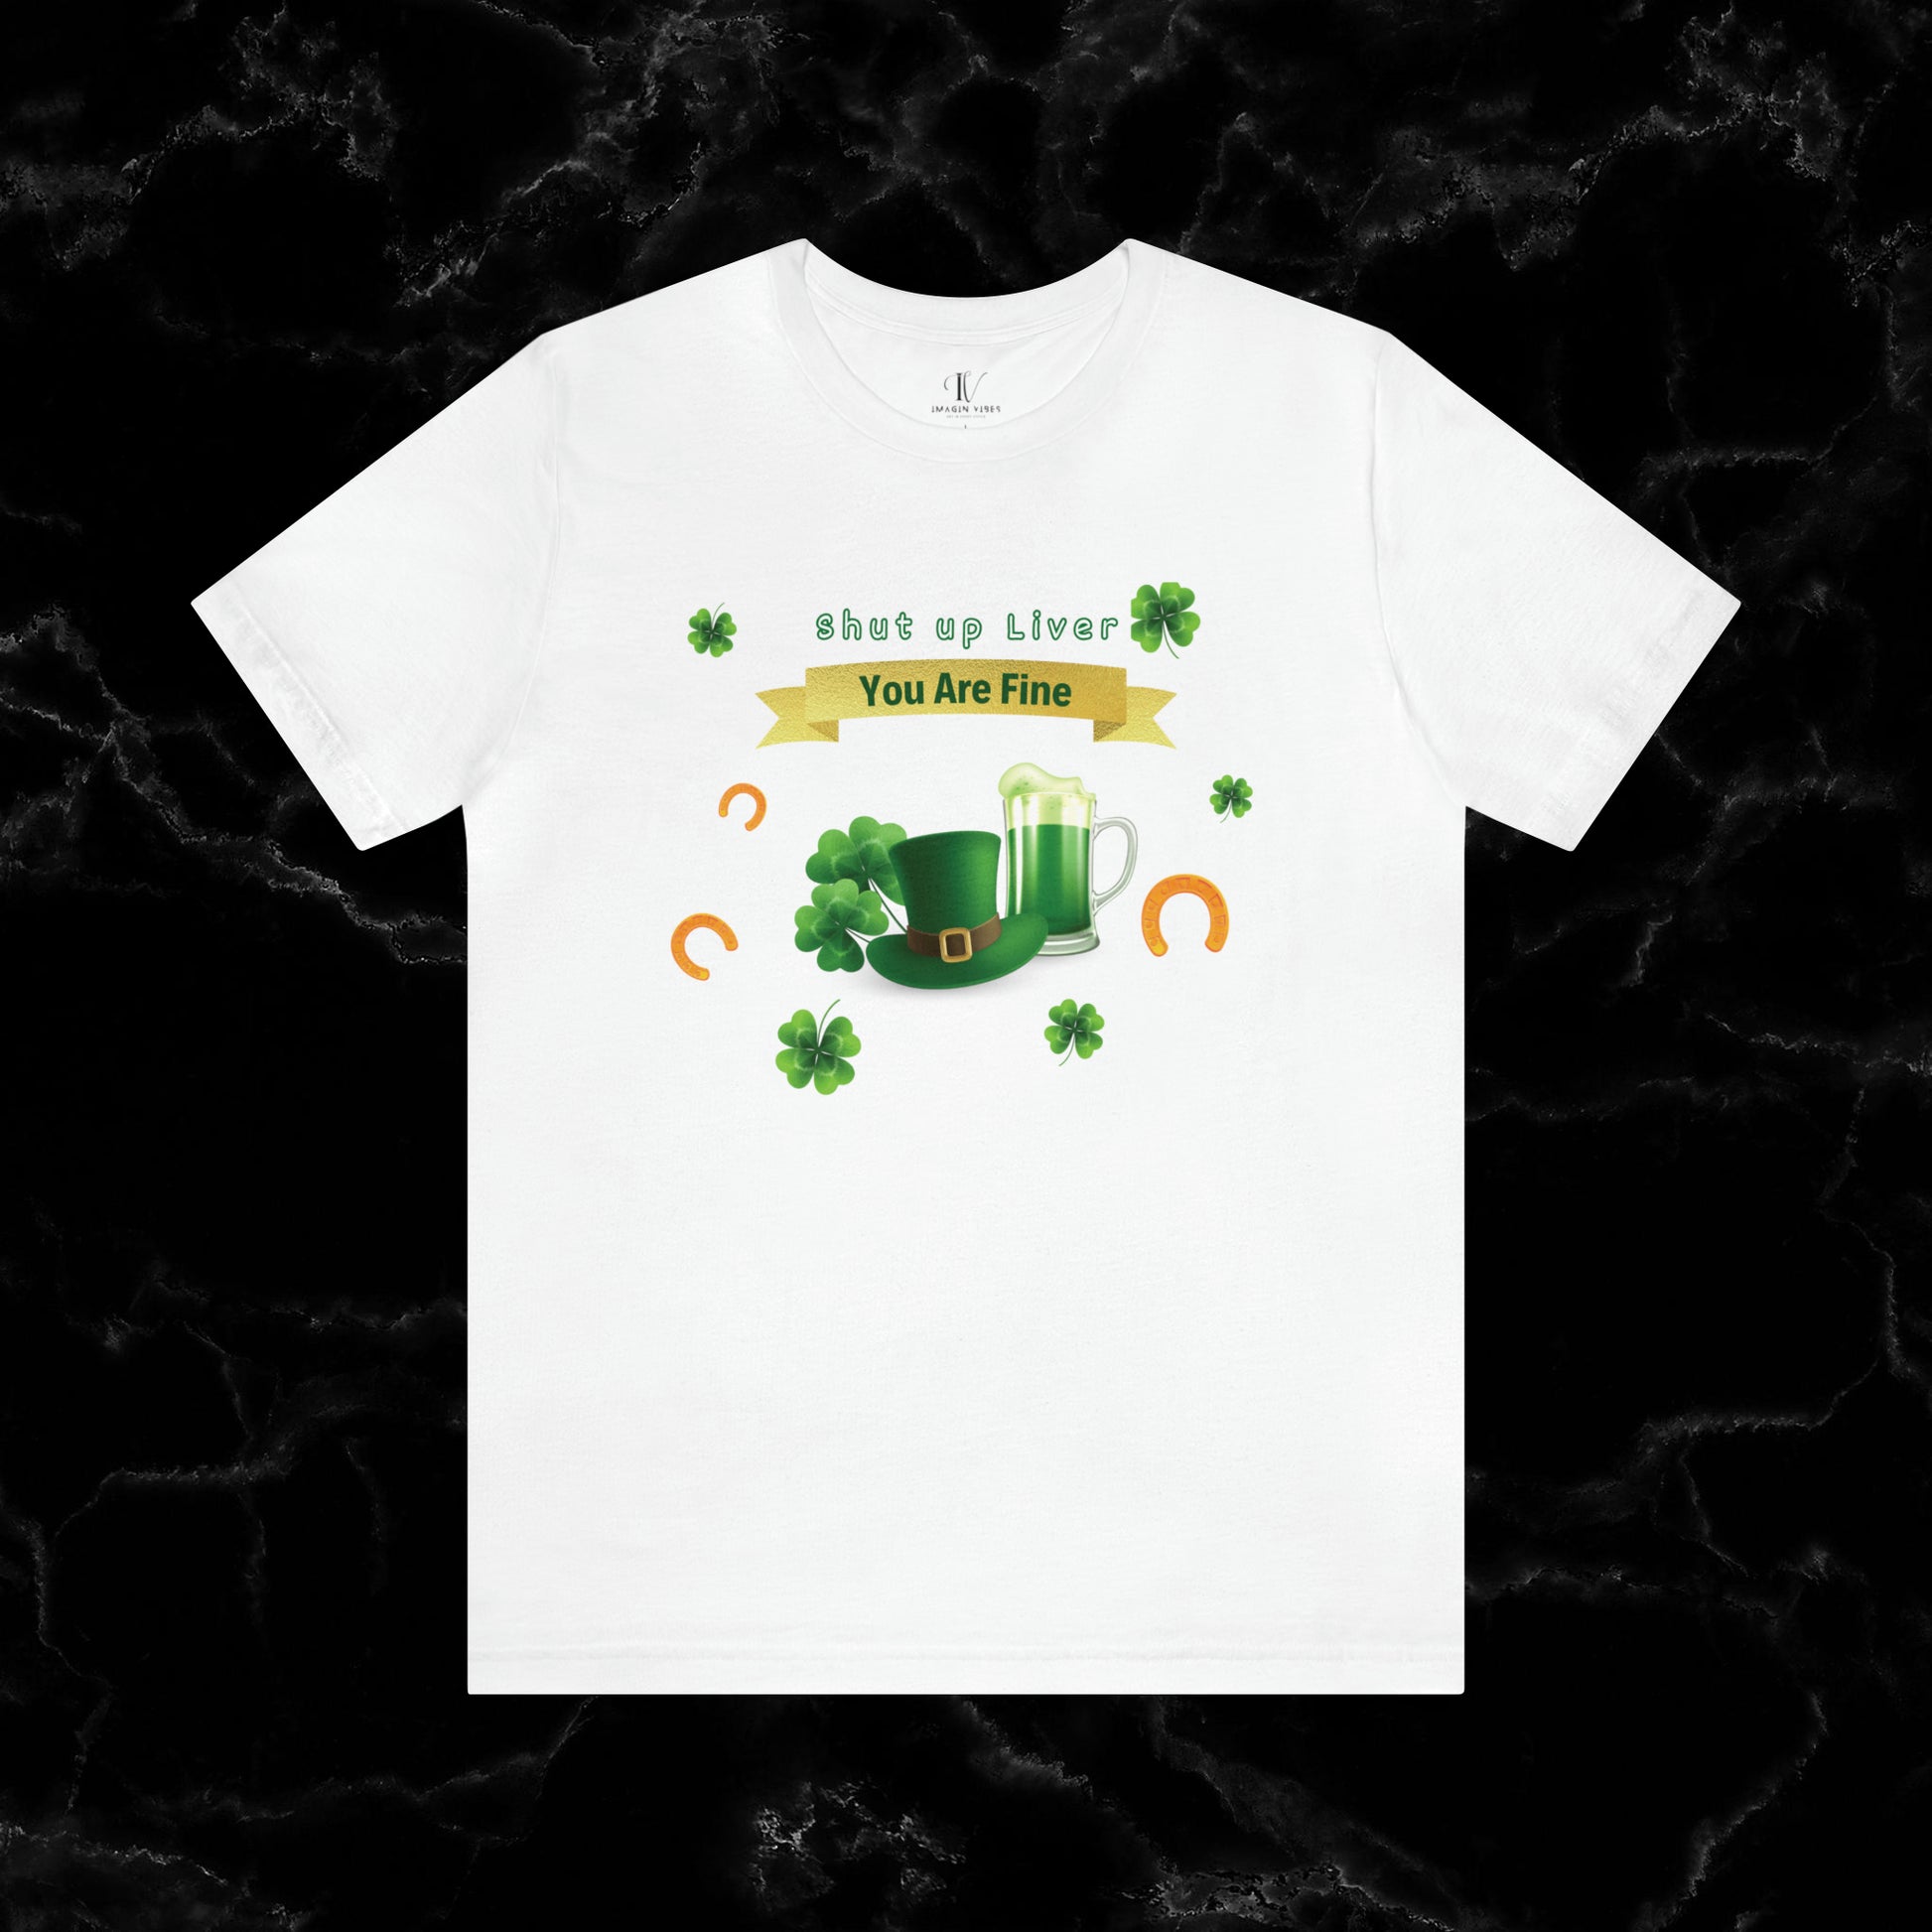 Shut Up Liver You're Fine Shirt - St. Patrick's Day Irish Tee for Funny Drinking and Irish Party Vibes T-Shirt White XS 